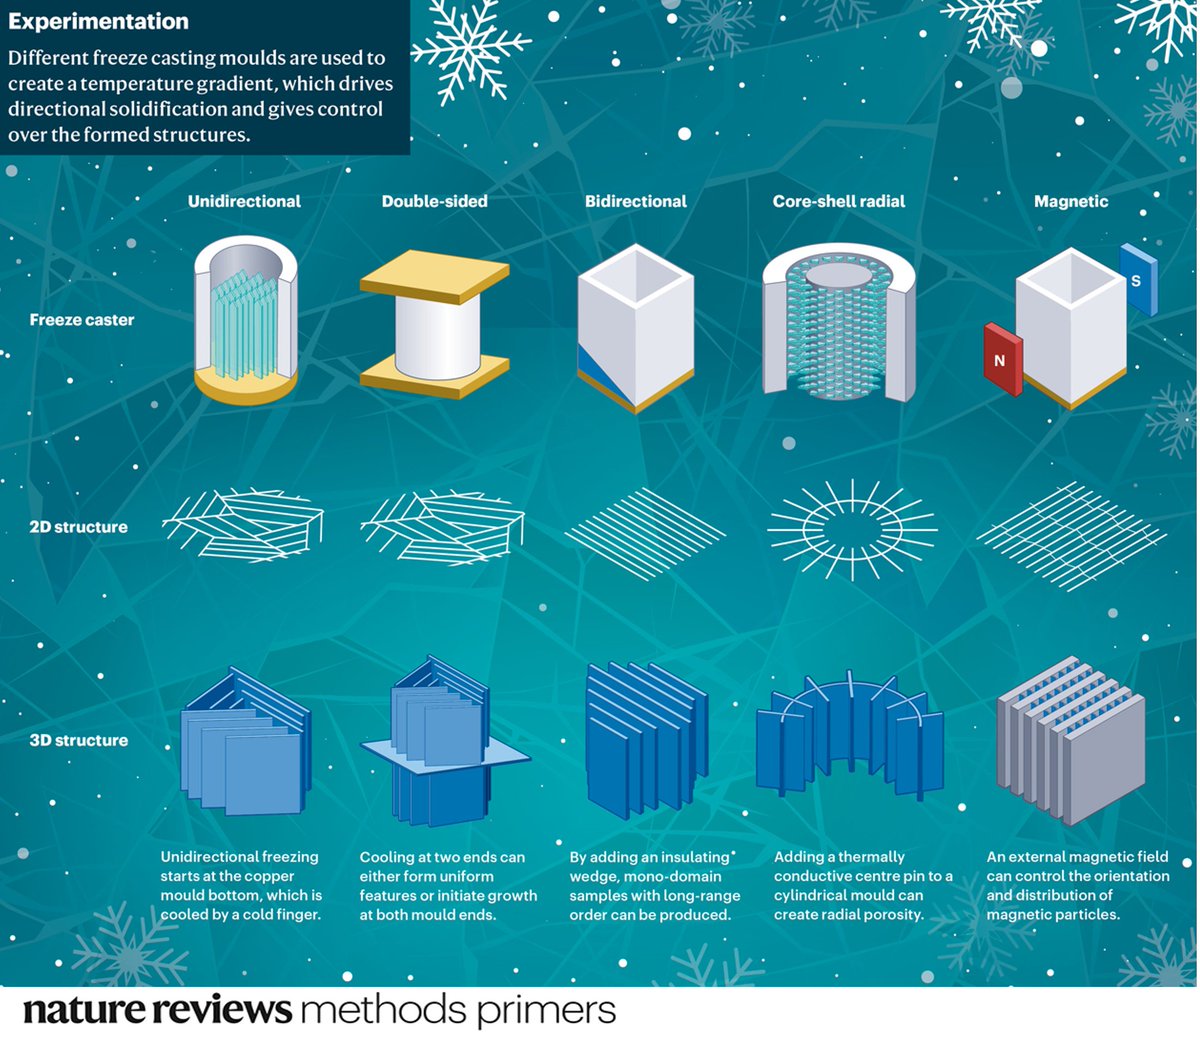 Our latest PrimeView highlights the structures formed with different freeze casting moulds. Free to download: go.nature.com/3WjiWxC